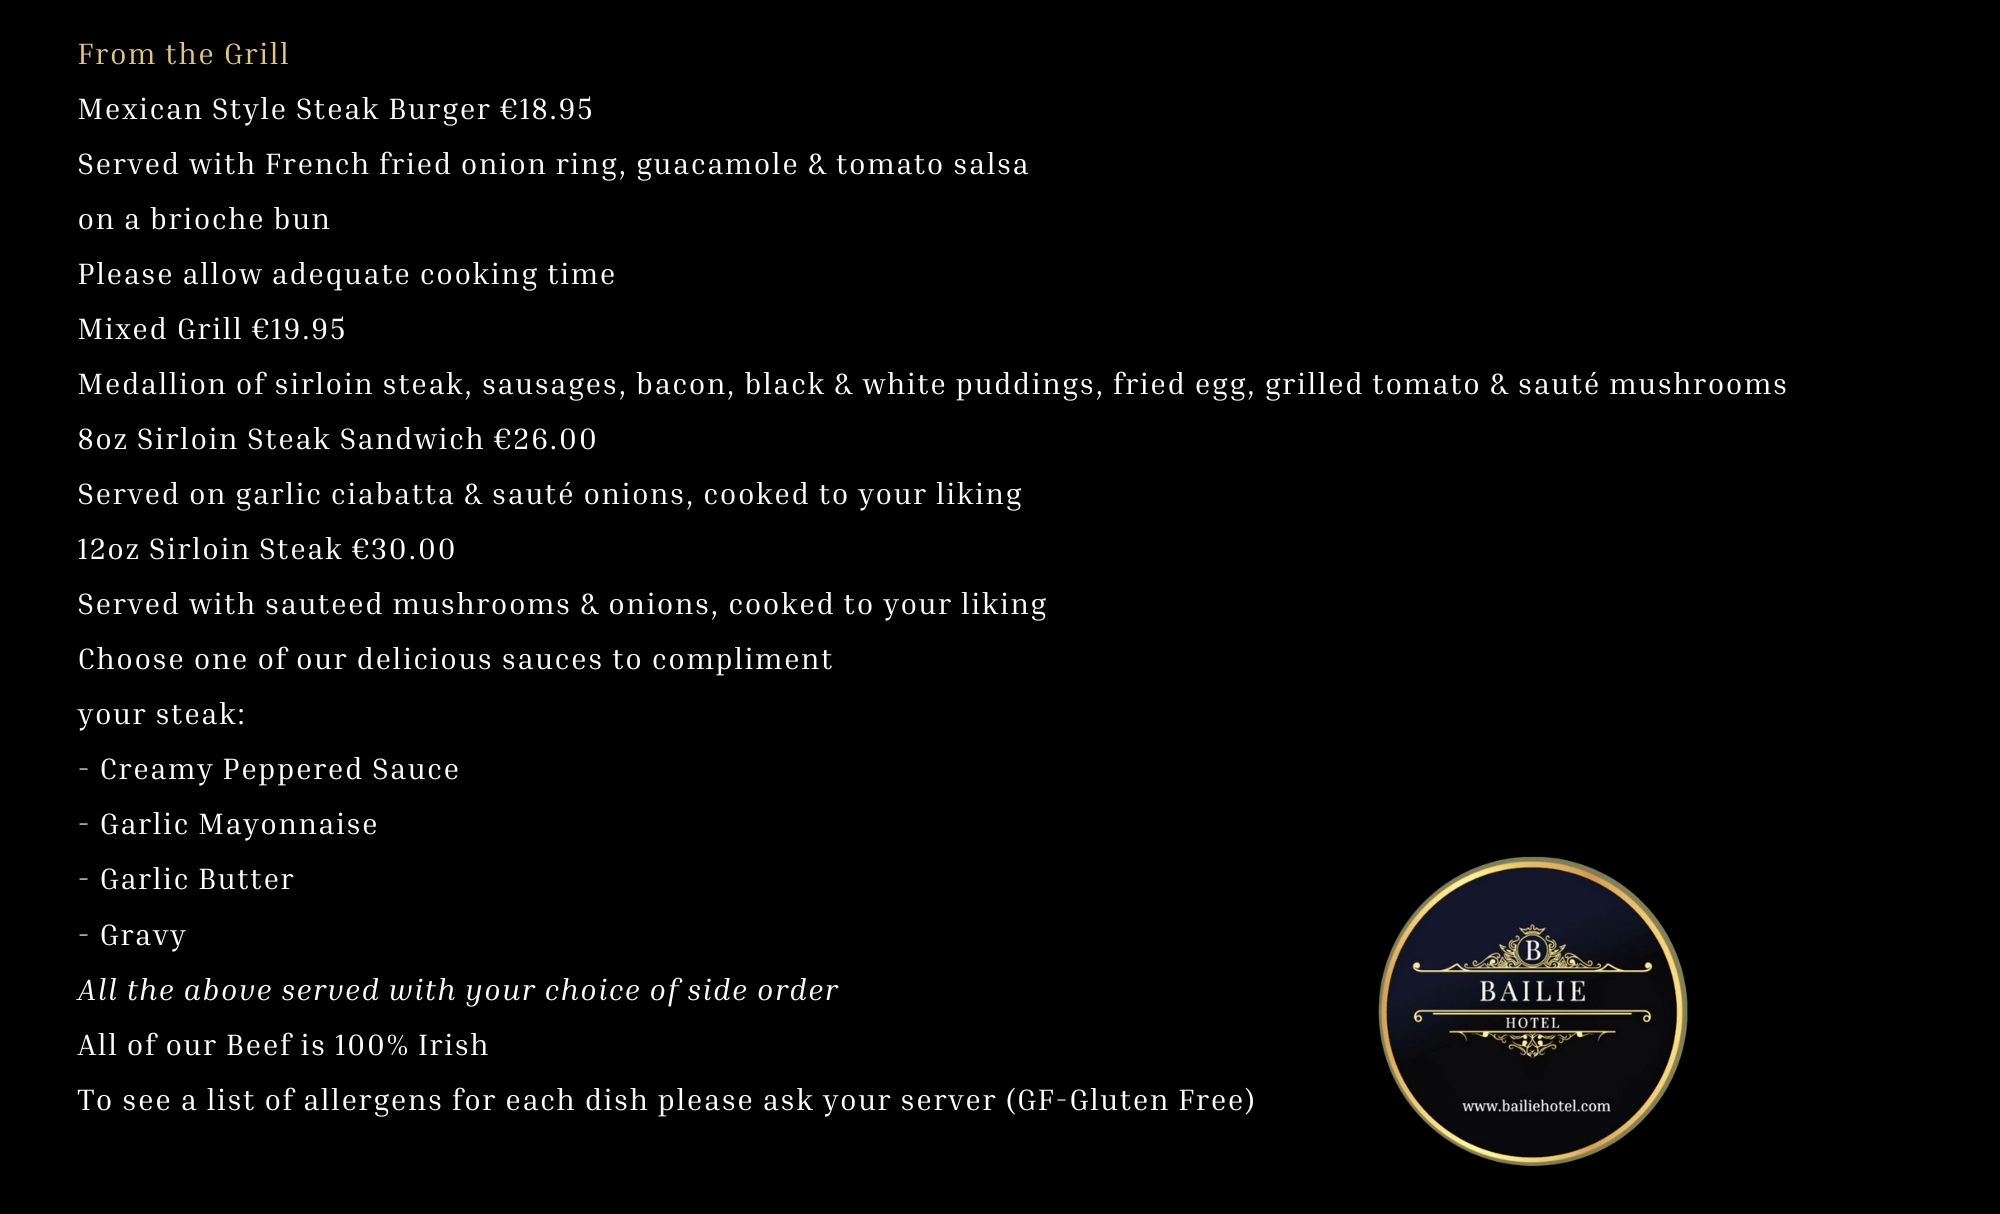 578-bailie-hotel-bar-menu-from-the-grill-17150954074906.png